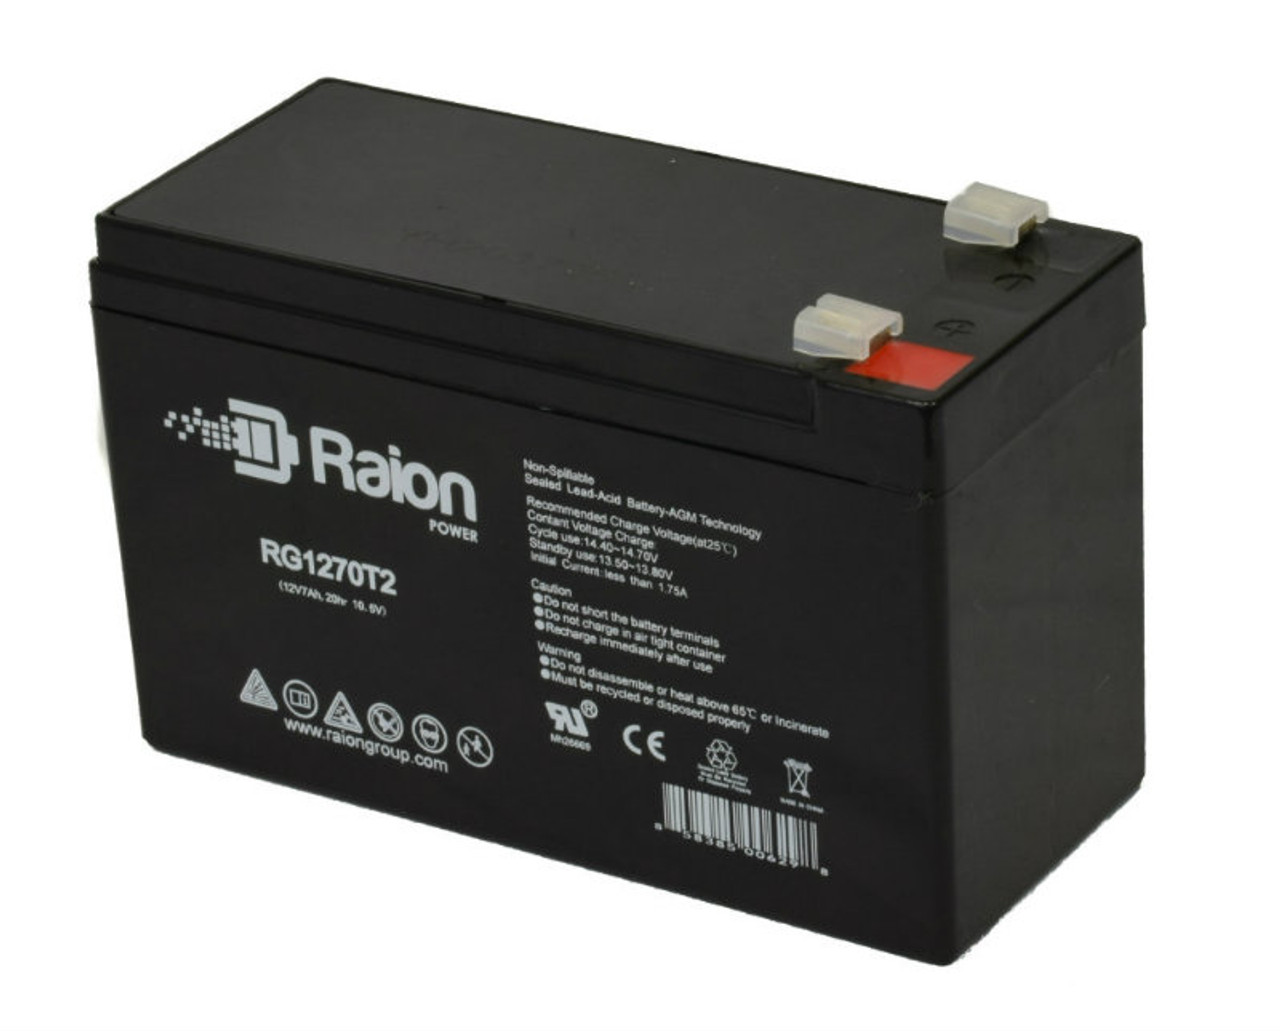 Raion Power RG1270T1 12V 7Ah Non-Spillable Replacement Battery for Powertron PT7-12 F1